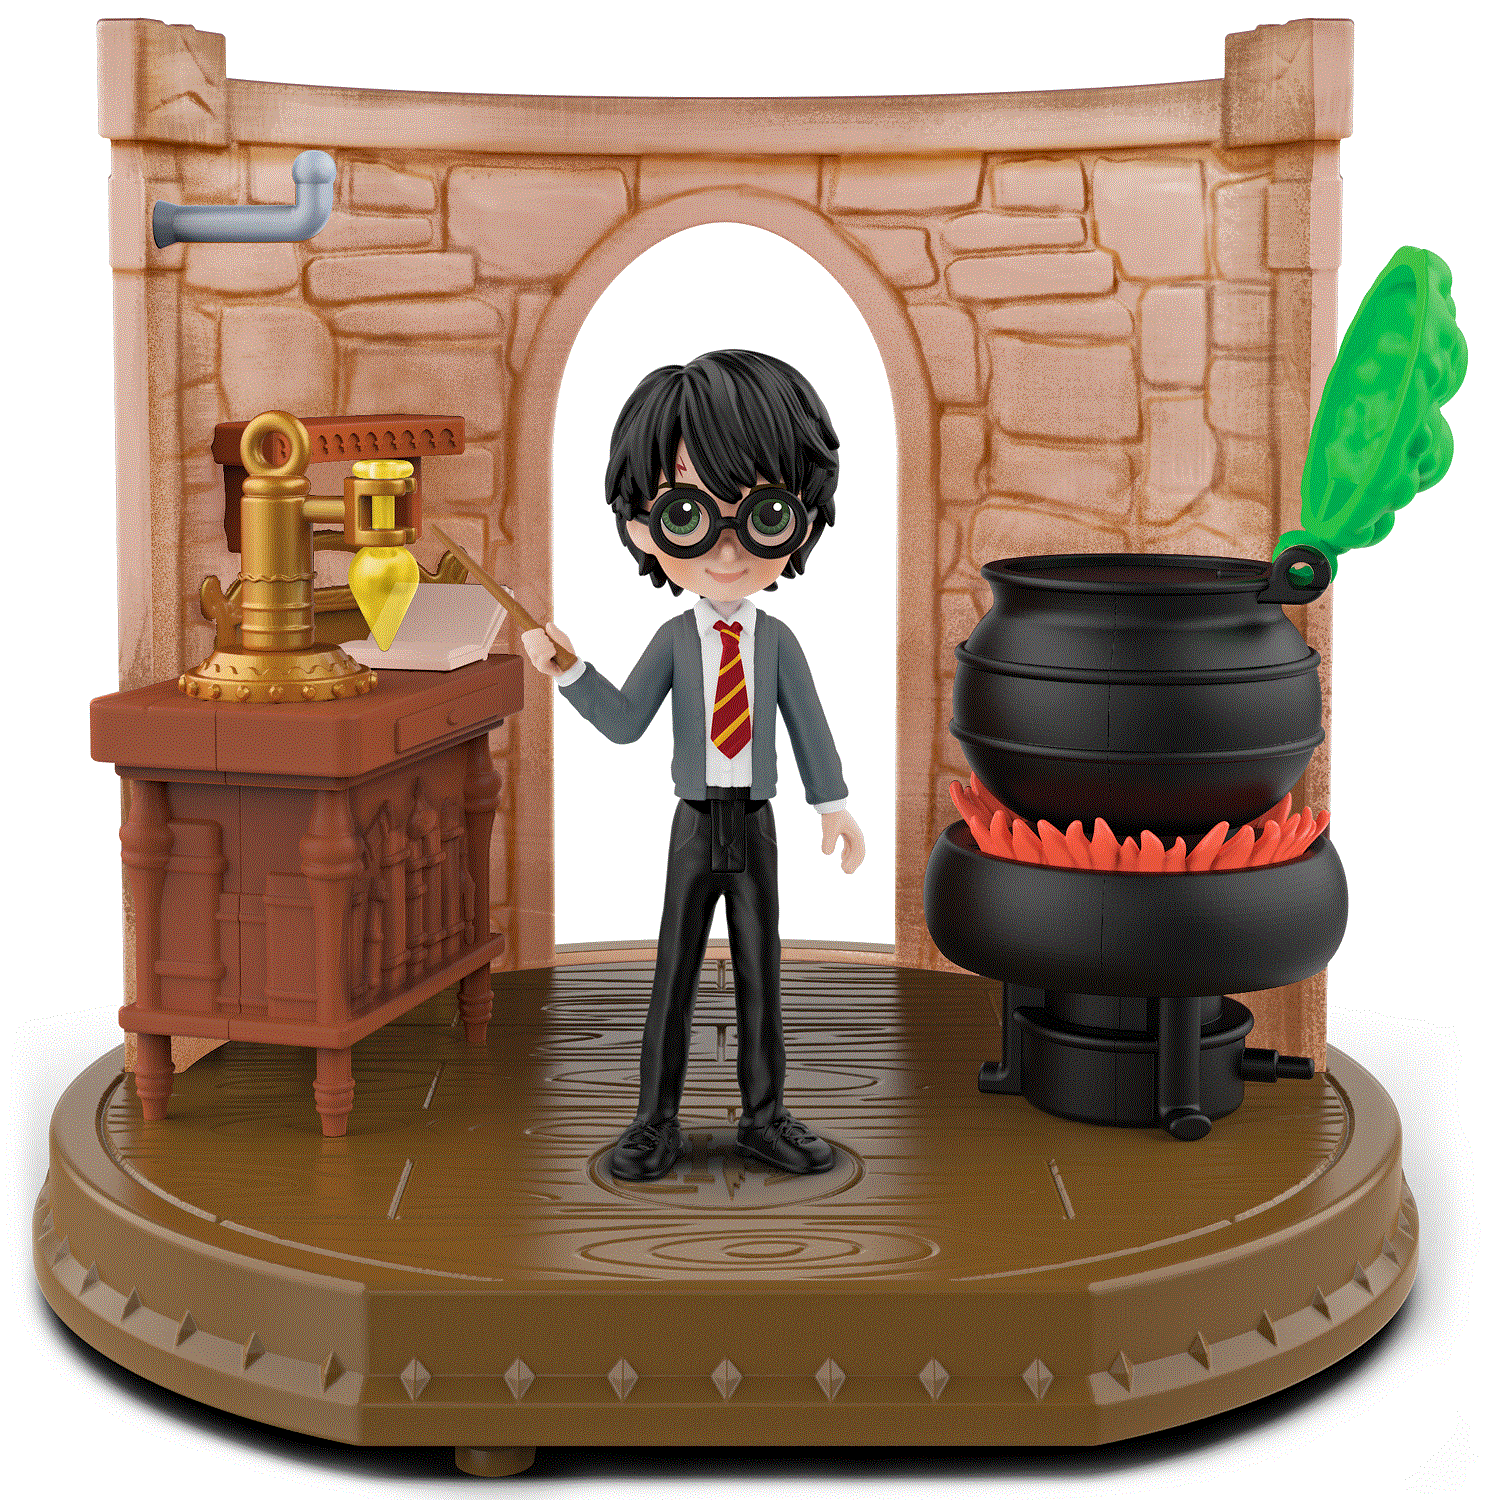 Magical Charmers' Classroom Playsets